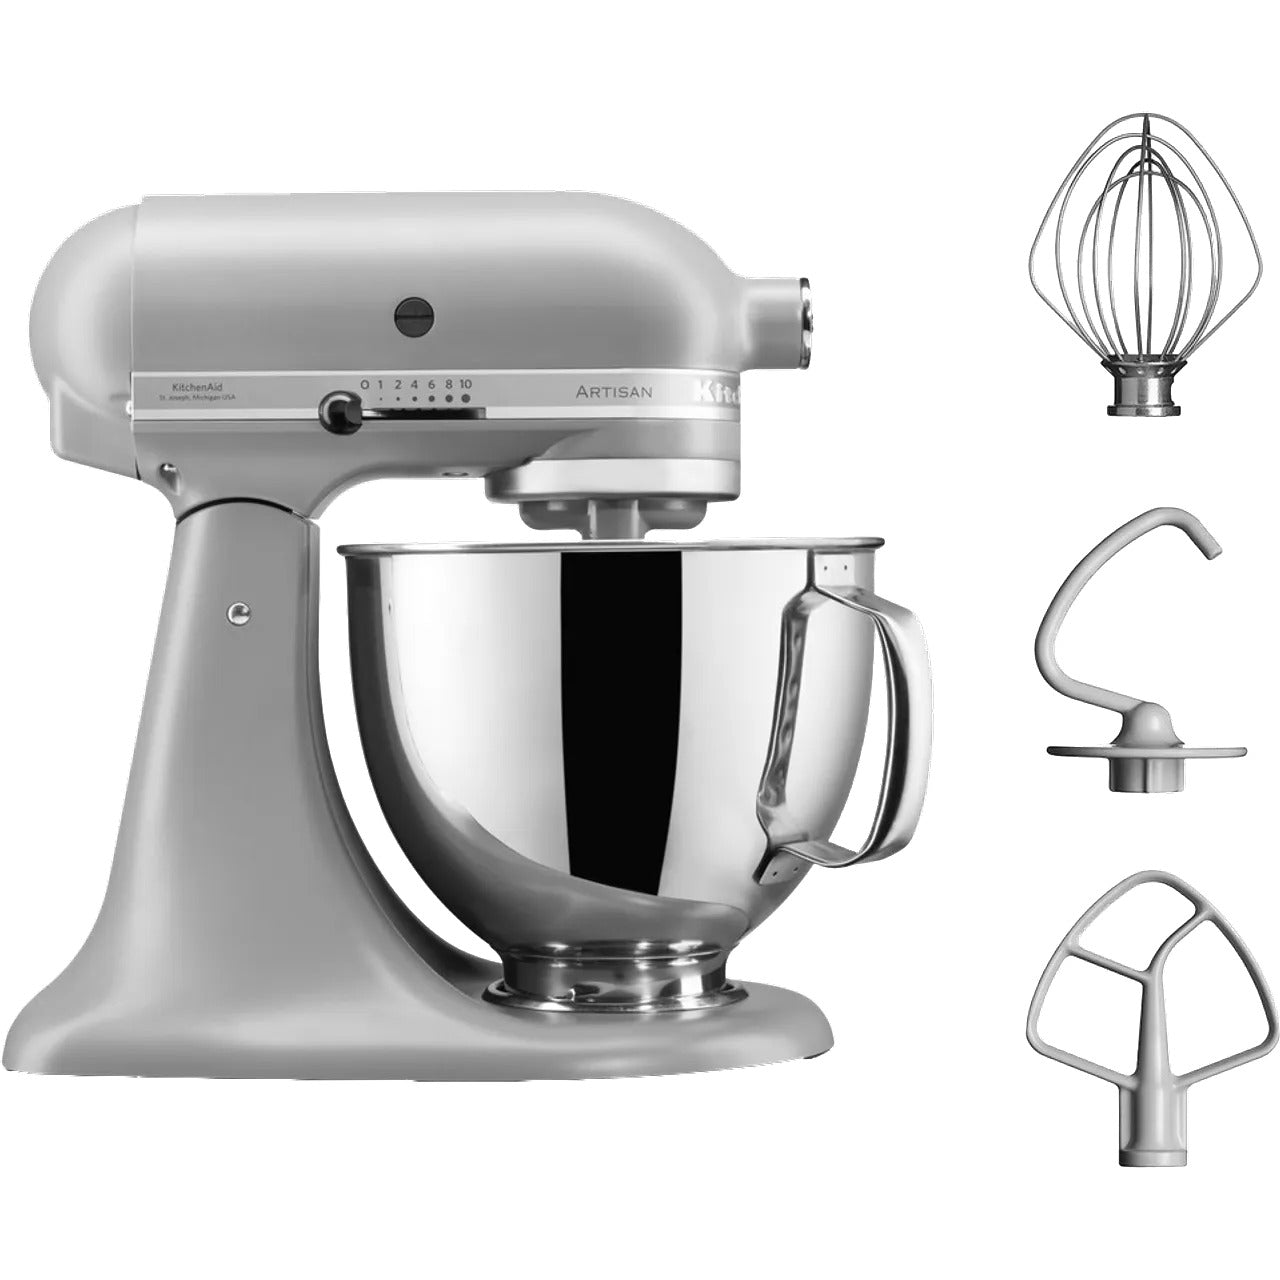 KitchenAid ™ Artisan Mixer 4.8L Matte Grey - Includes Wire Whisk, Dough Hook and Flat Beater (5KSM125BFG)